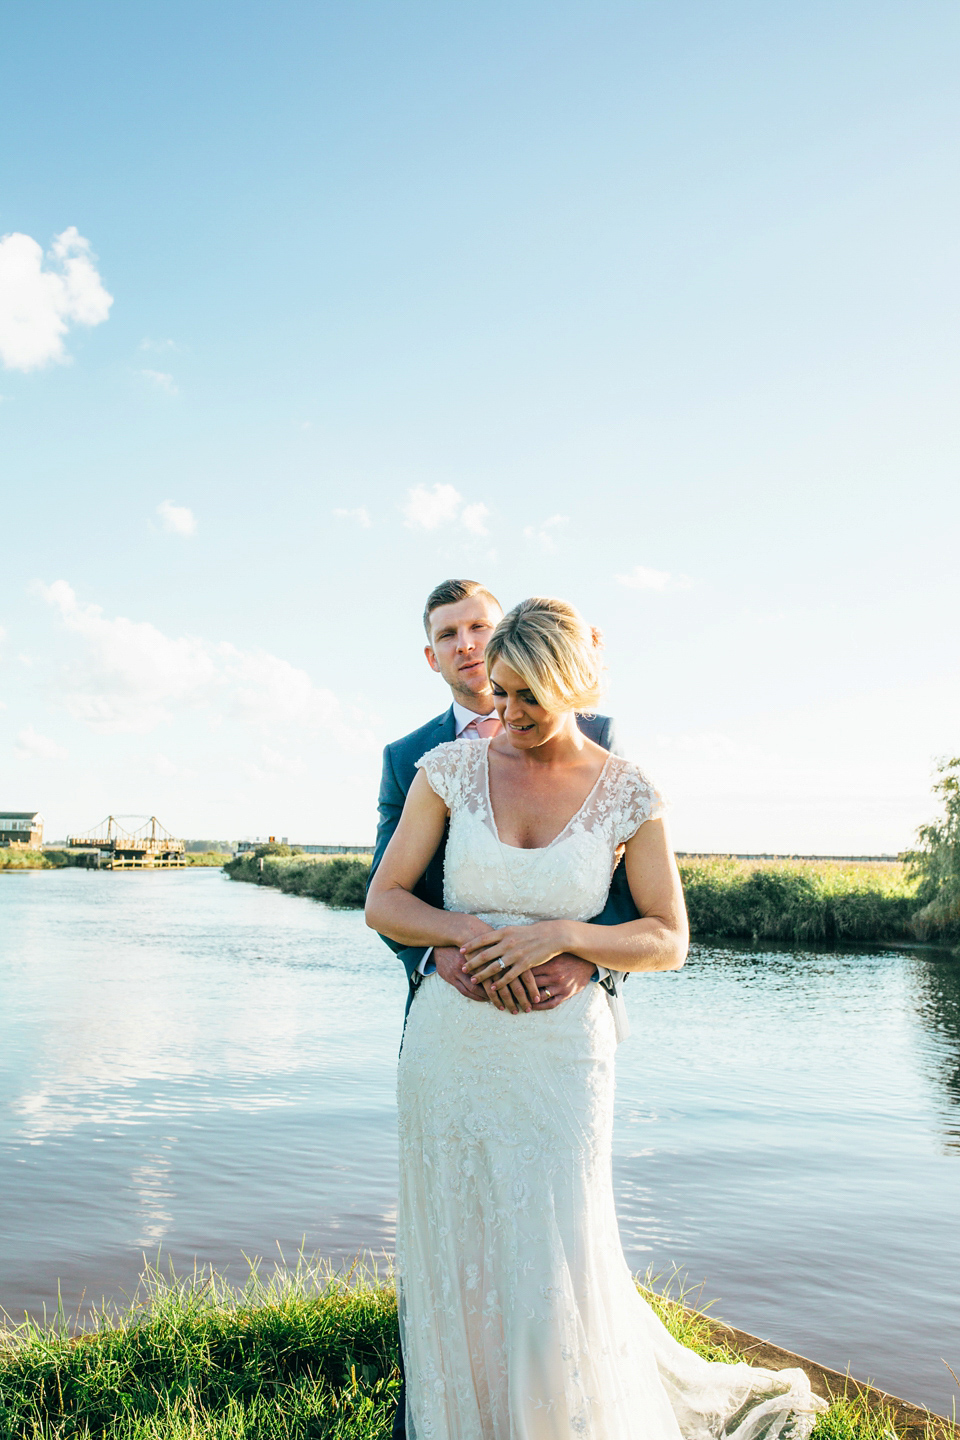 Bride Sam wore a Maggie Sottero gown for her romantic Suffolk country pub wedding. Photography by Emily Tyler.